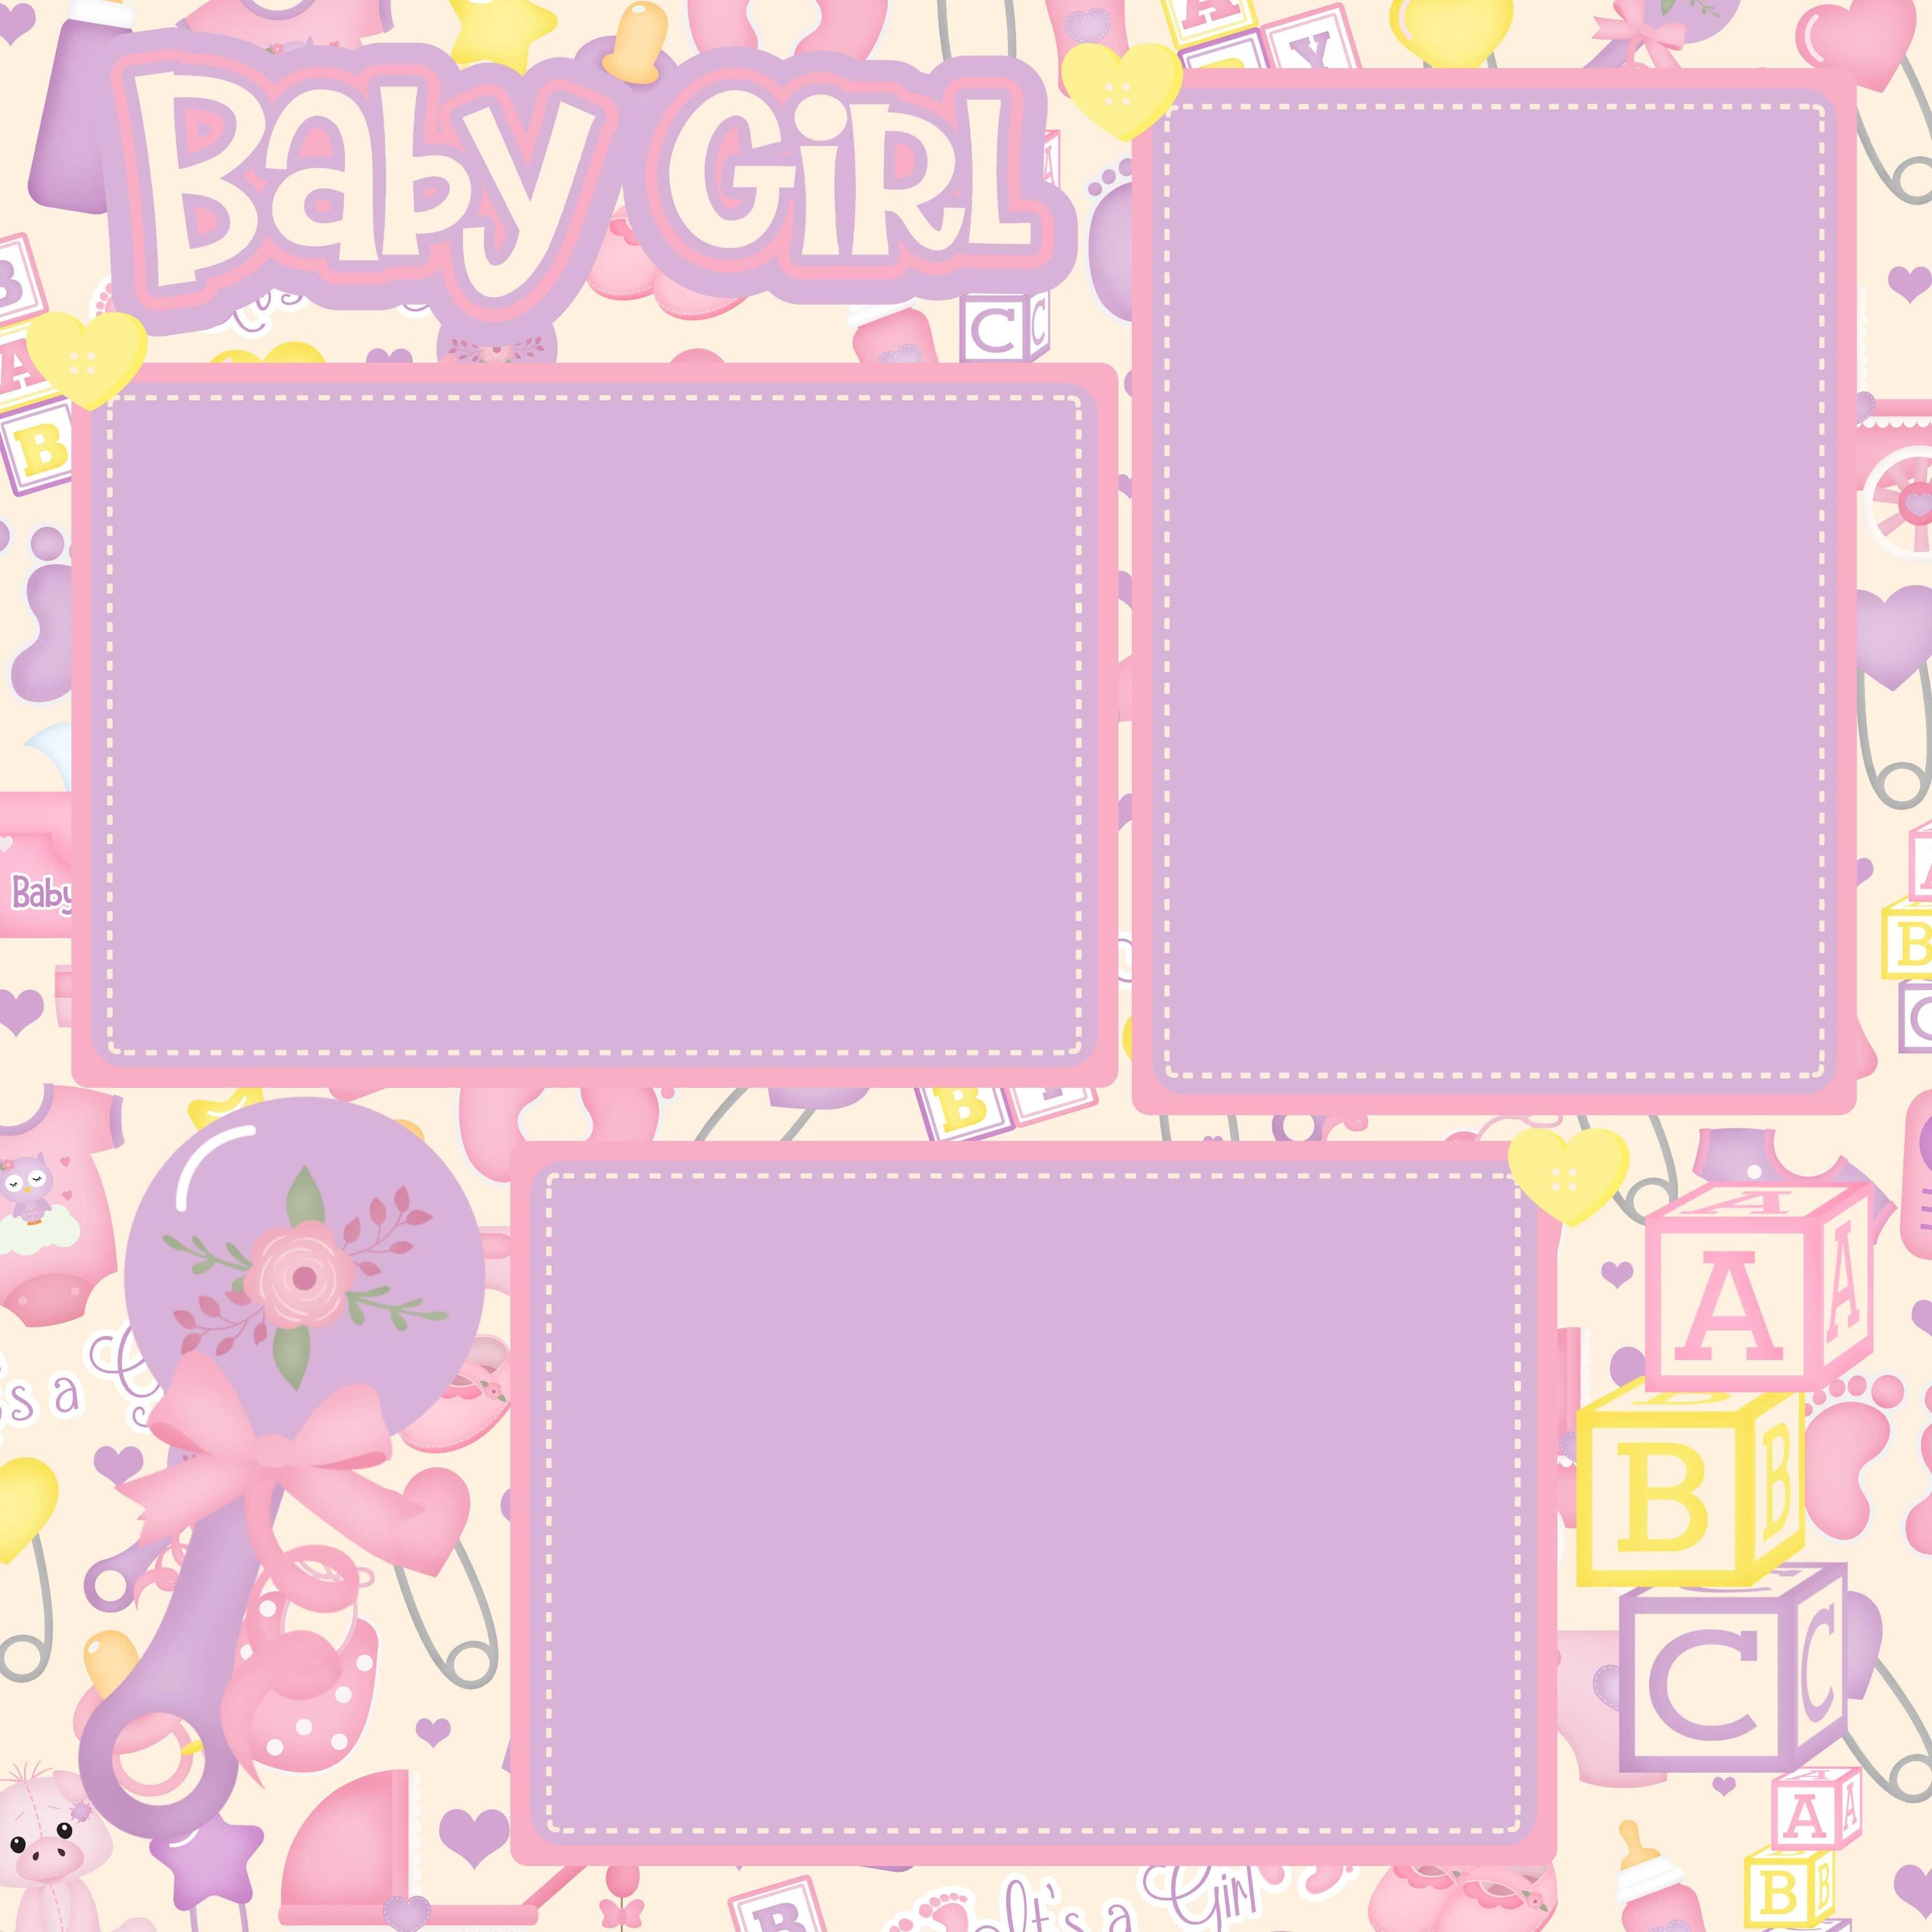 It's A Girl Collection Baby Girl (2) - 12 x 12 Premade, Printed Scrapbook Pages by SSC Designs - Scrapbook Supply Companies